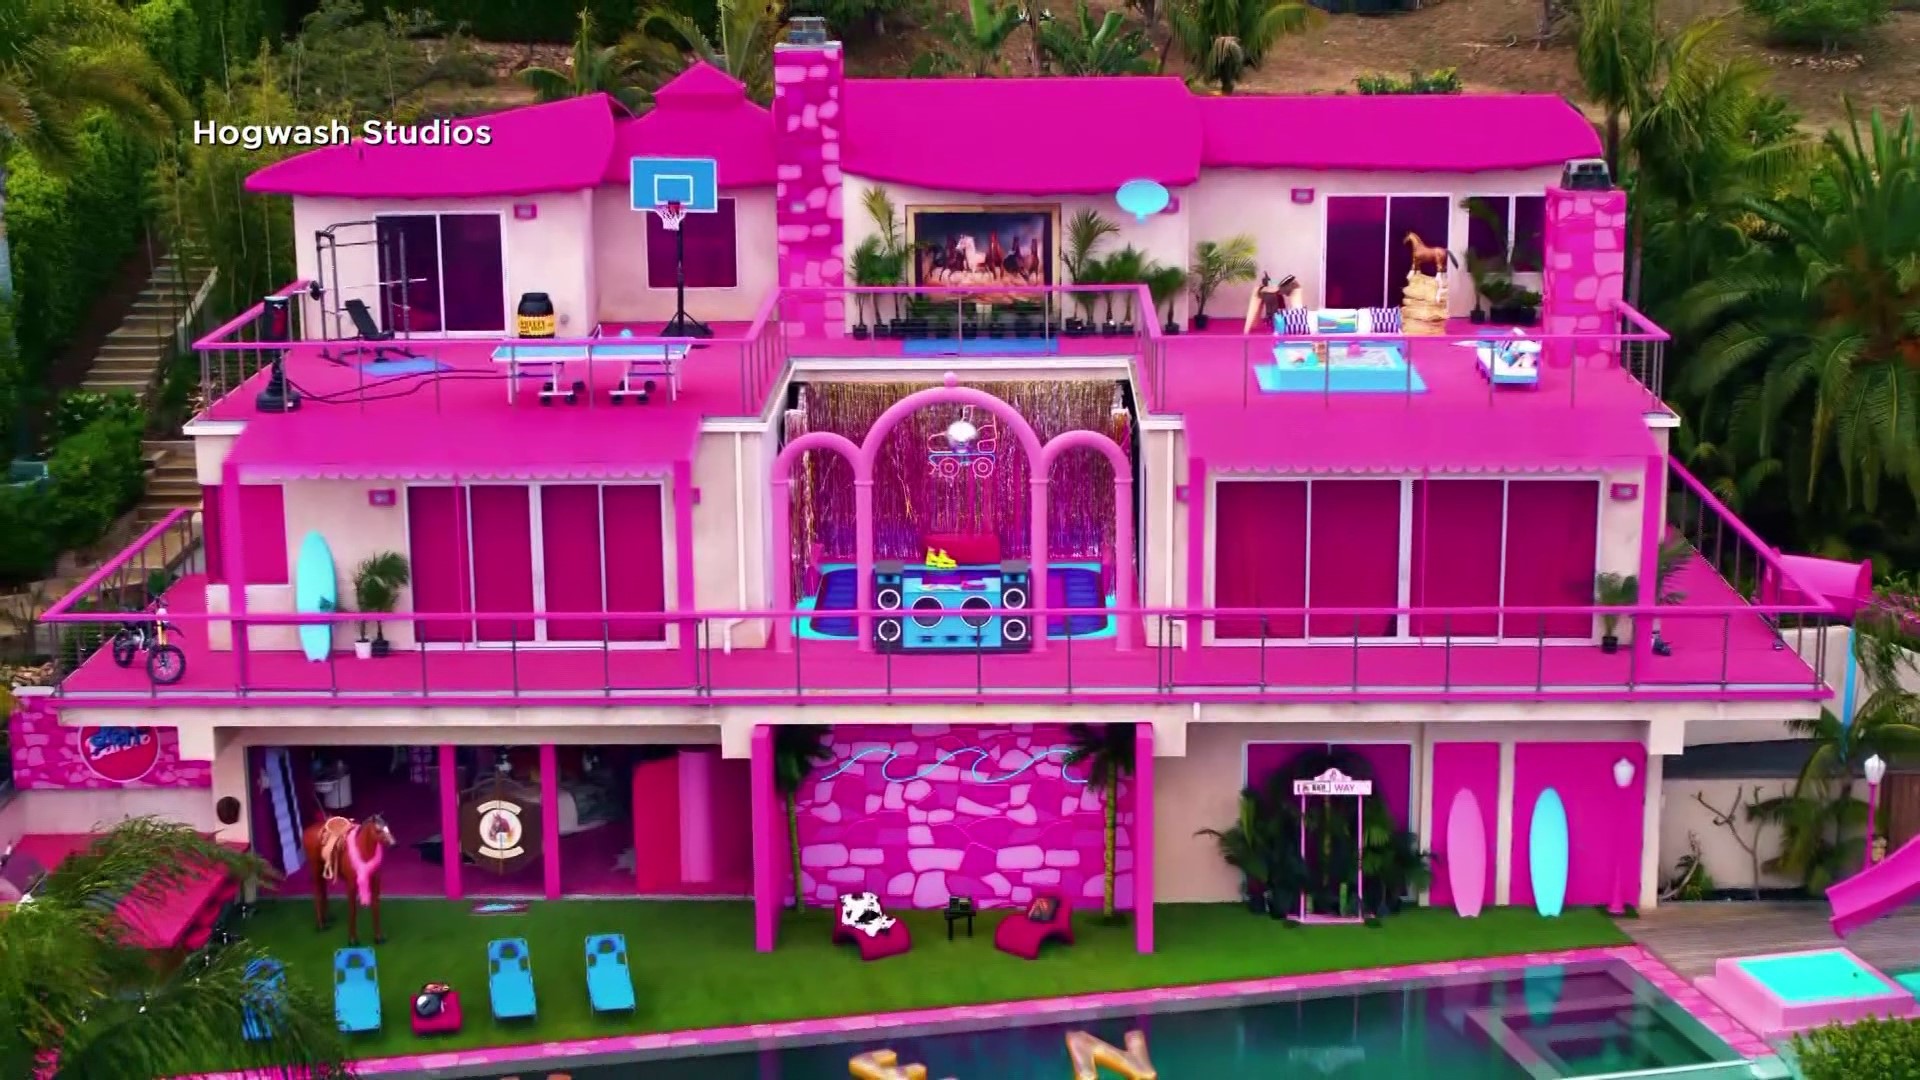 Stay at Barbie's Malibu Dreamhouse For Real with Airbnb